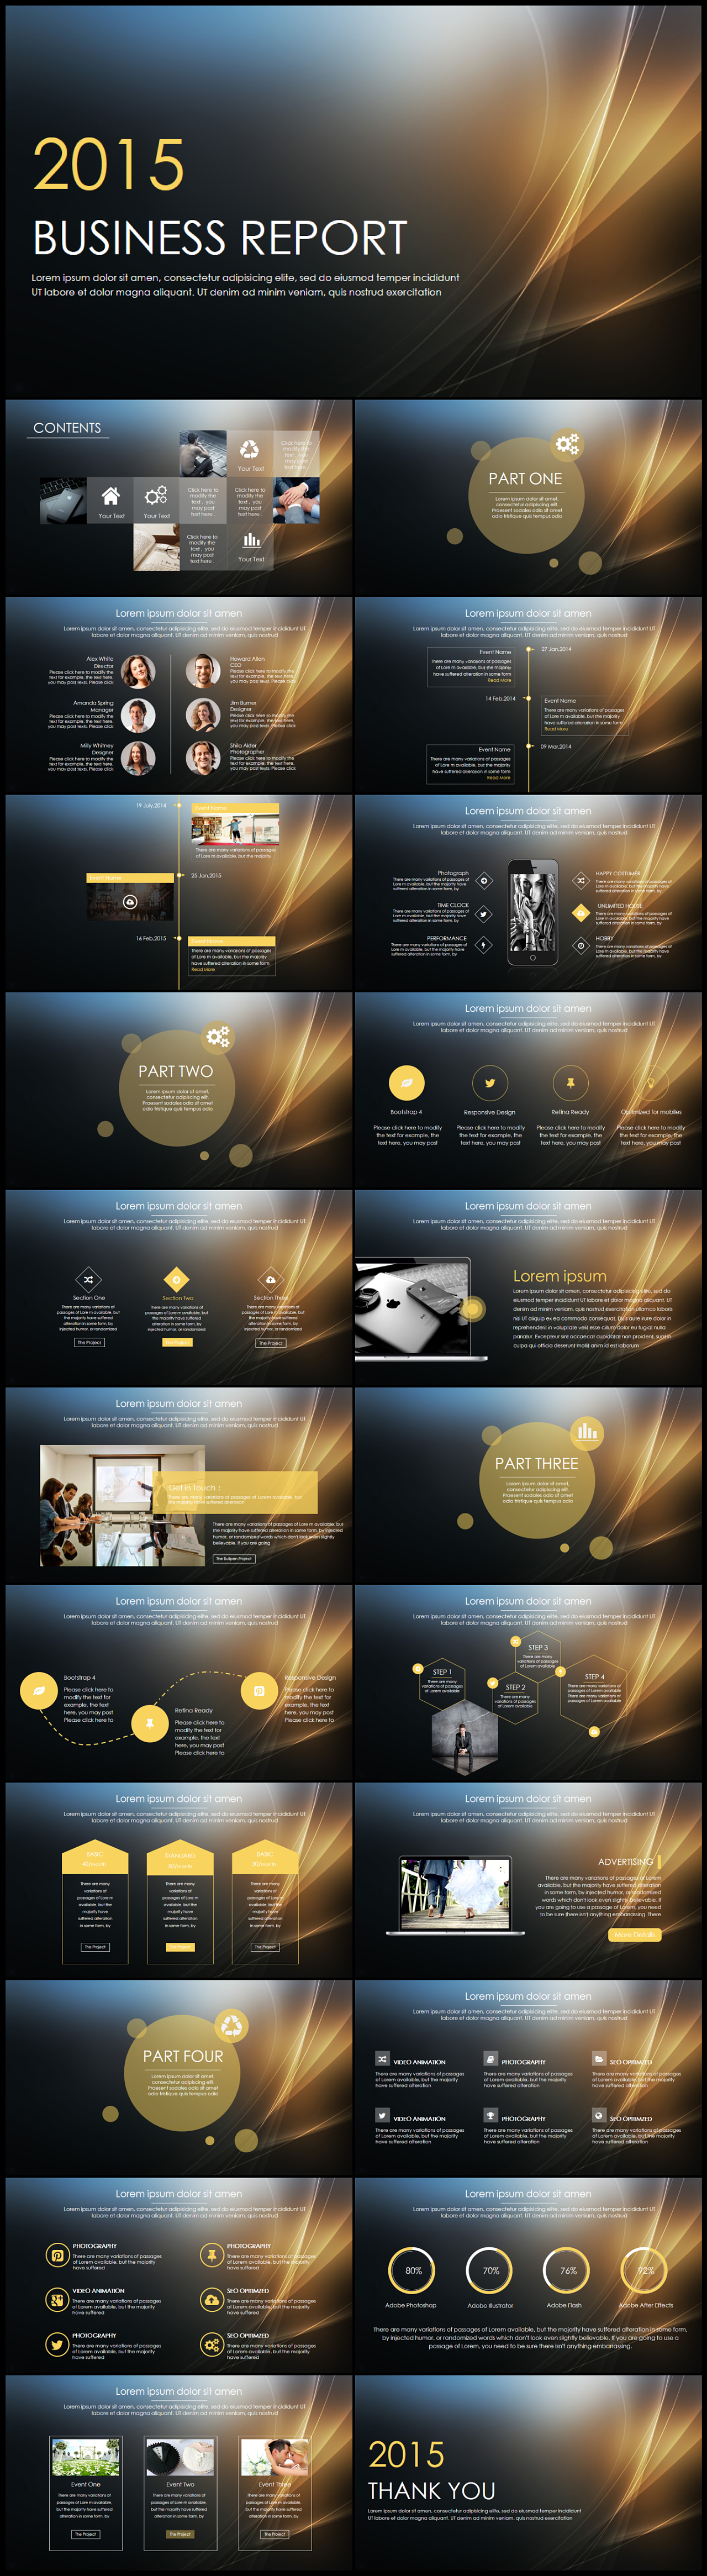 [Cool black gold] high-end atmosphere cool black gold business dynamic PPT template